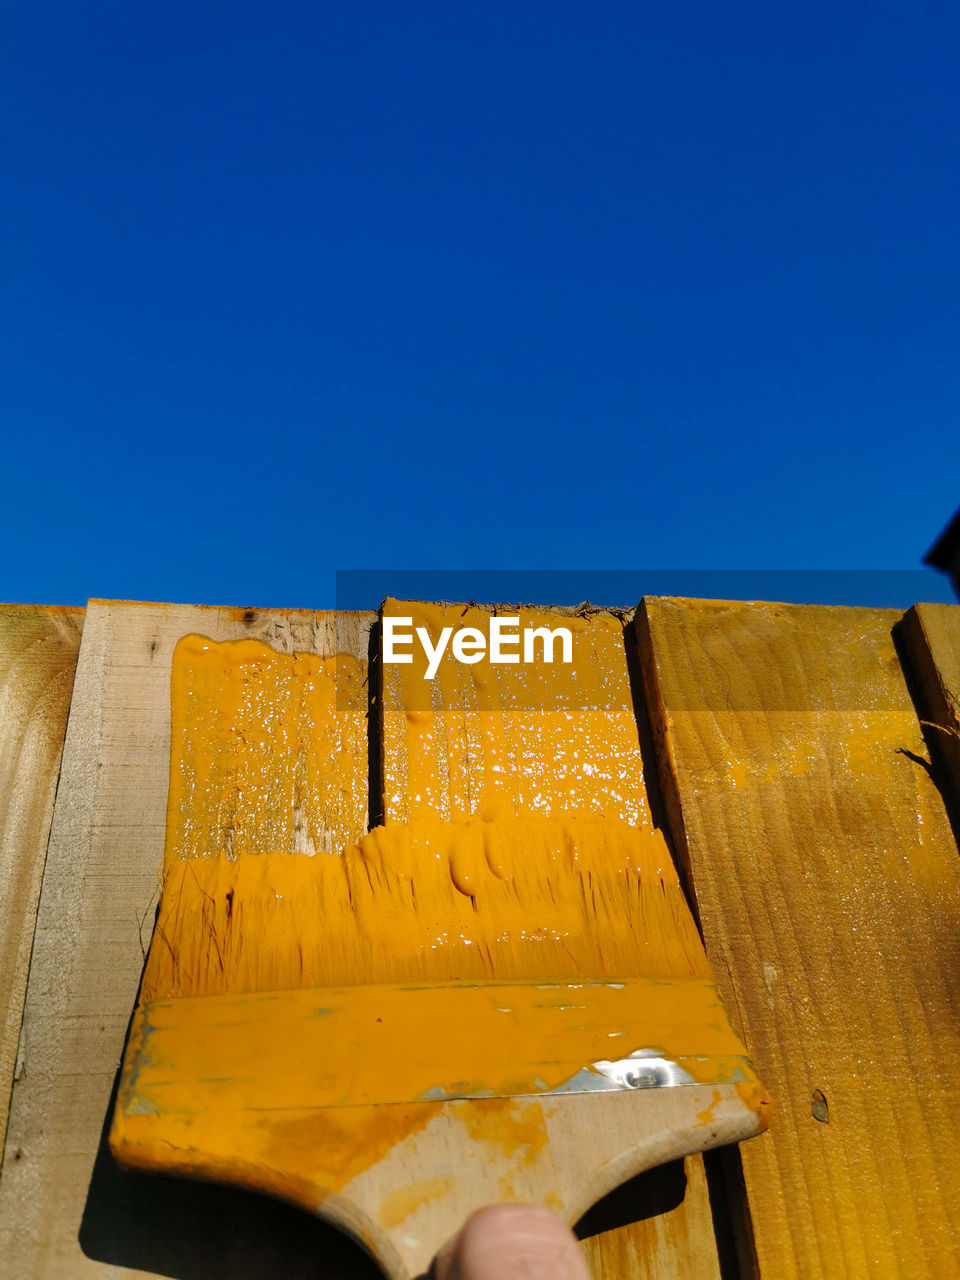 yellow, blue, sky, wood, clear sky, nature, day, copy space, architecture, wall, one person, outdoors, sunny, low angle view, sunlight